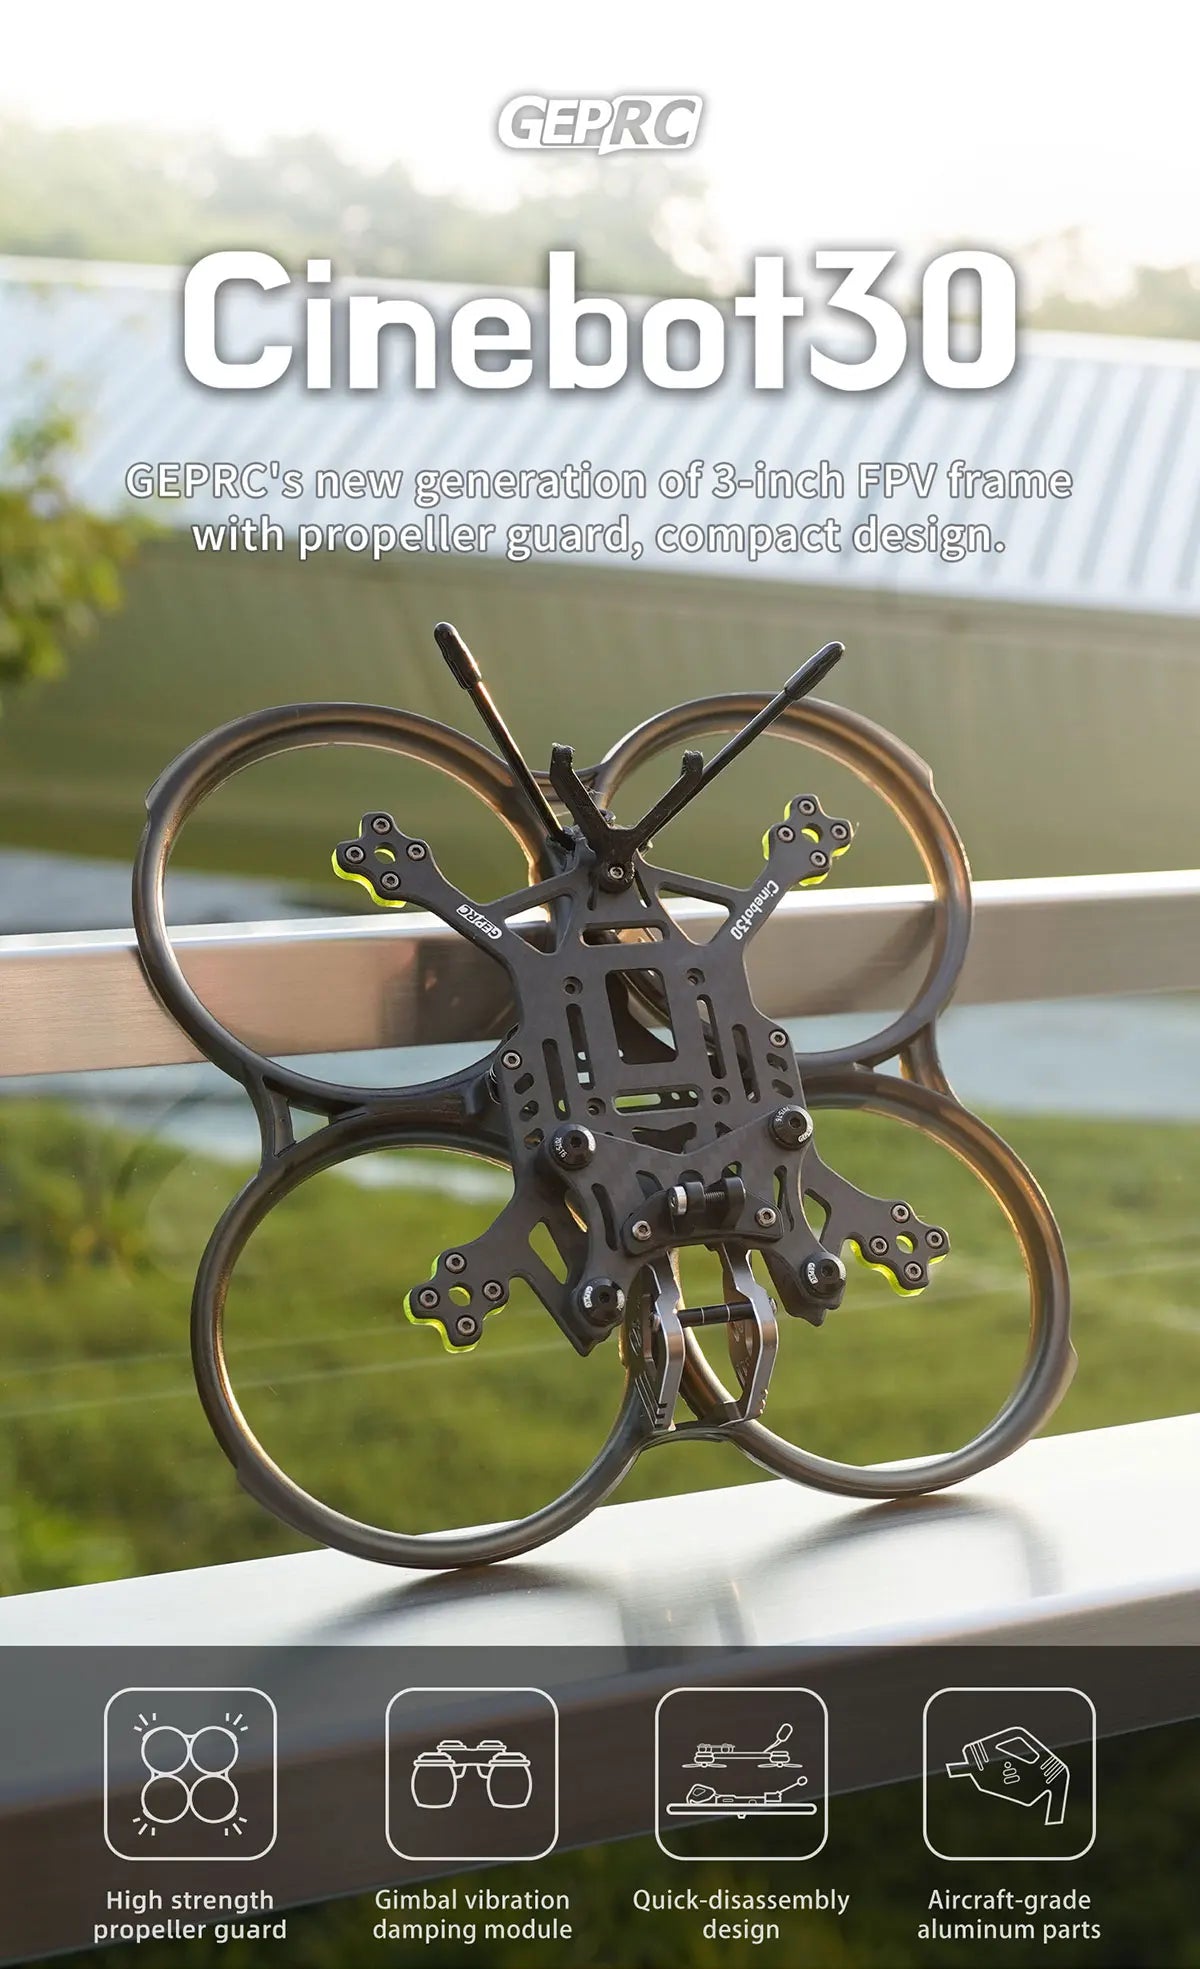 GEPRCIs new generation of 3-inch FPV frame with propeller guard 